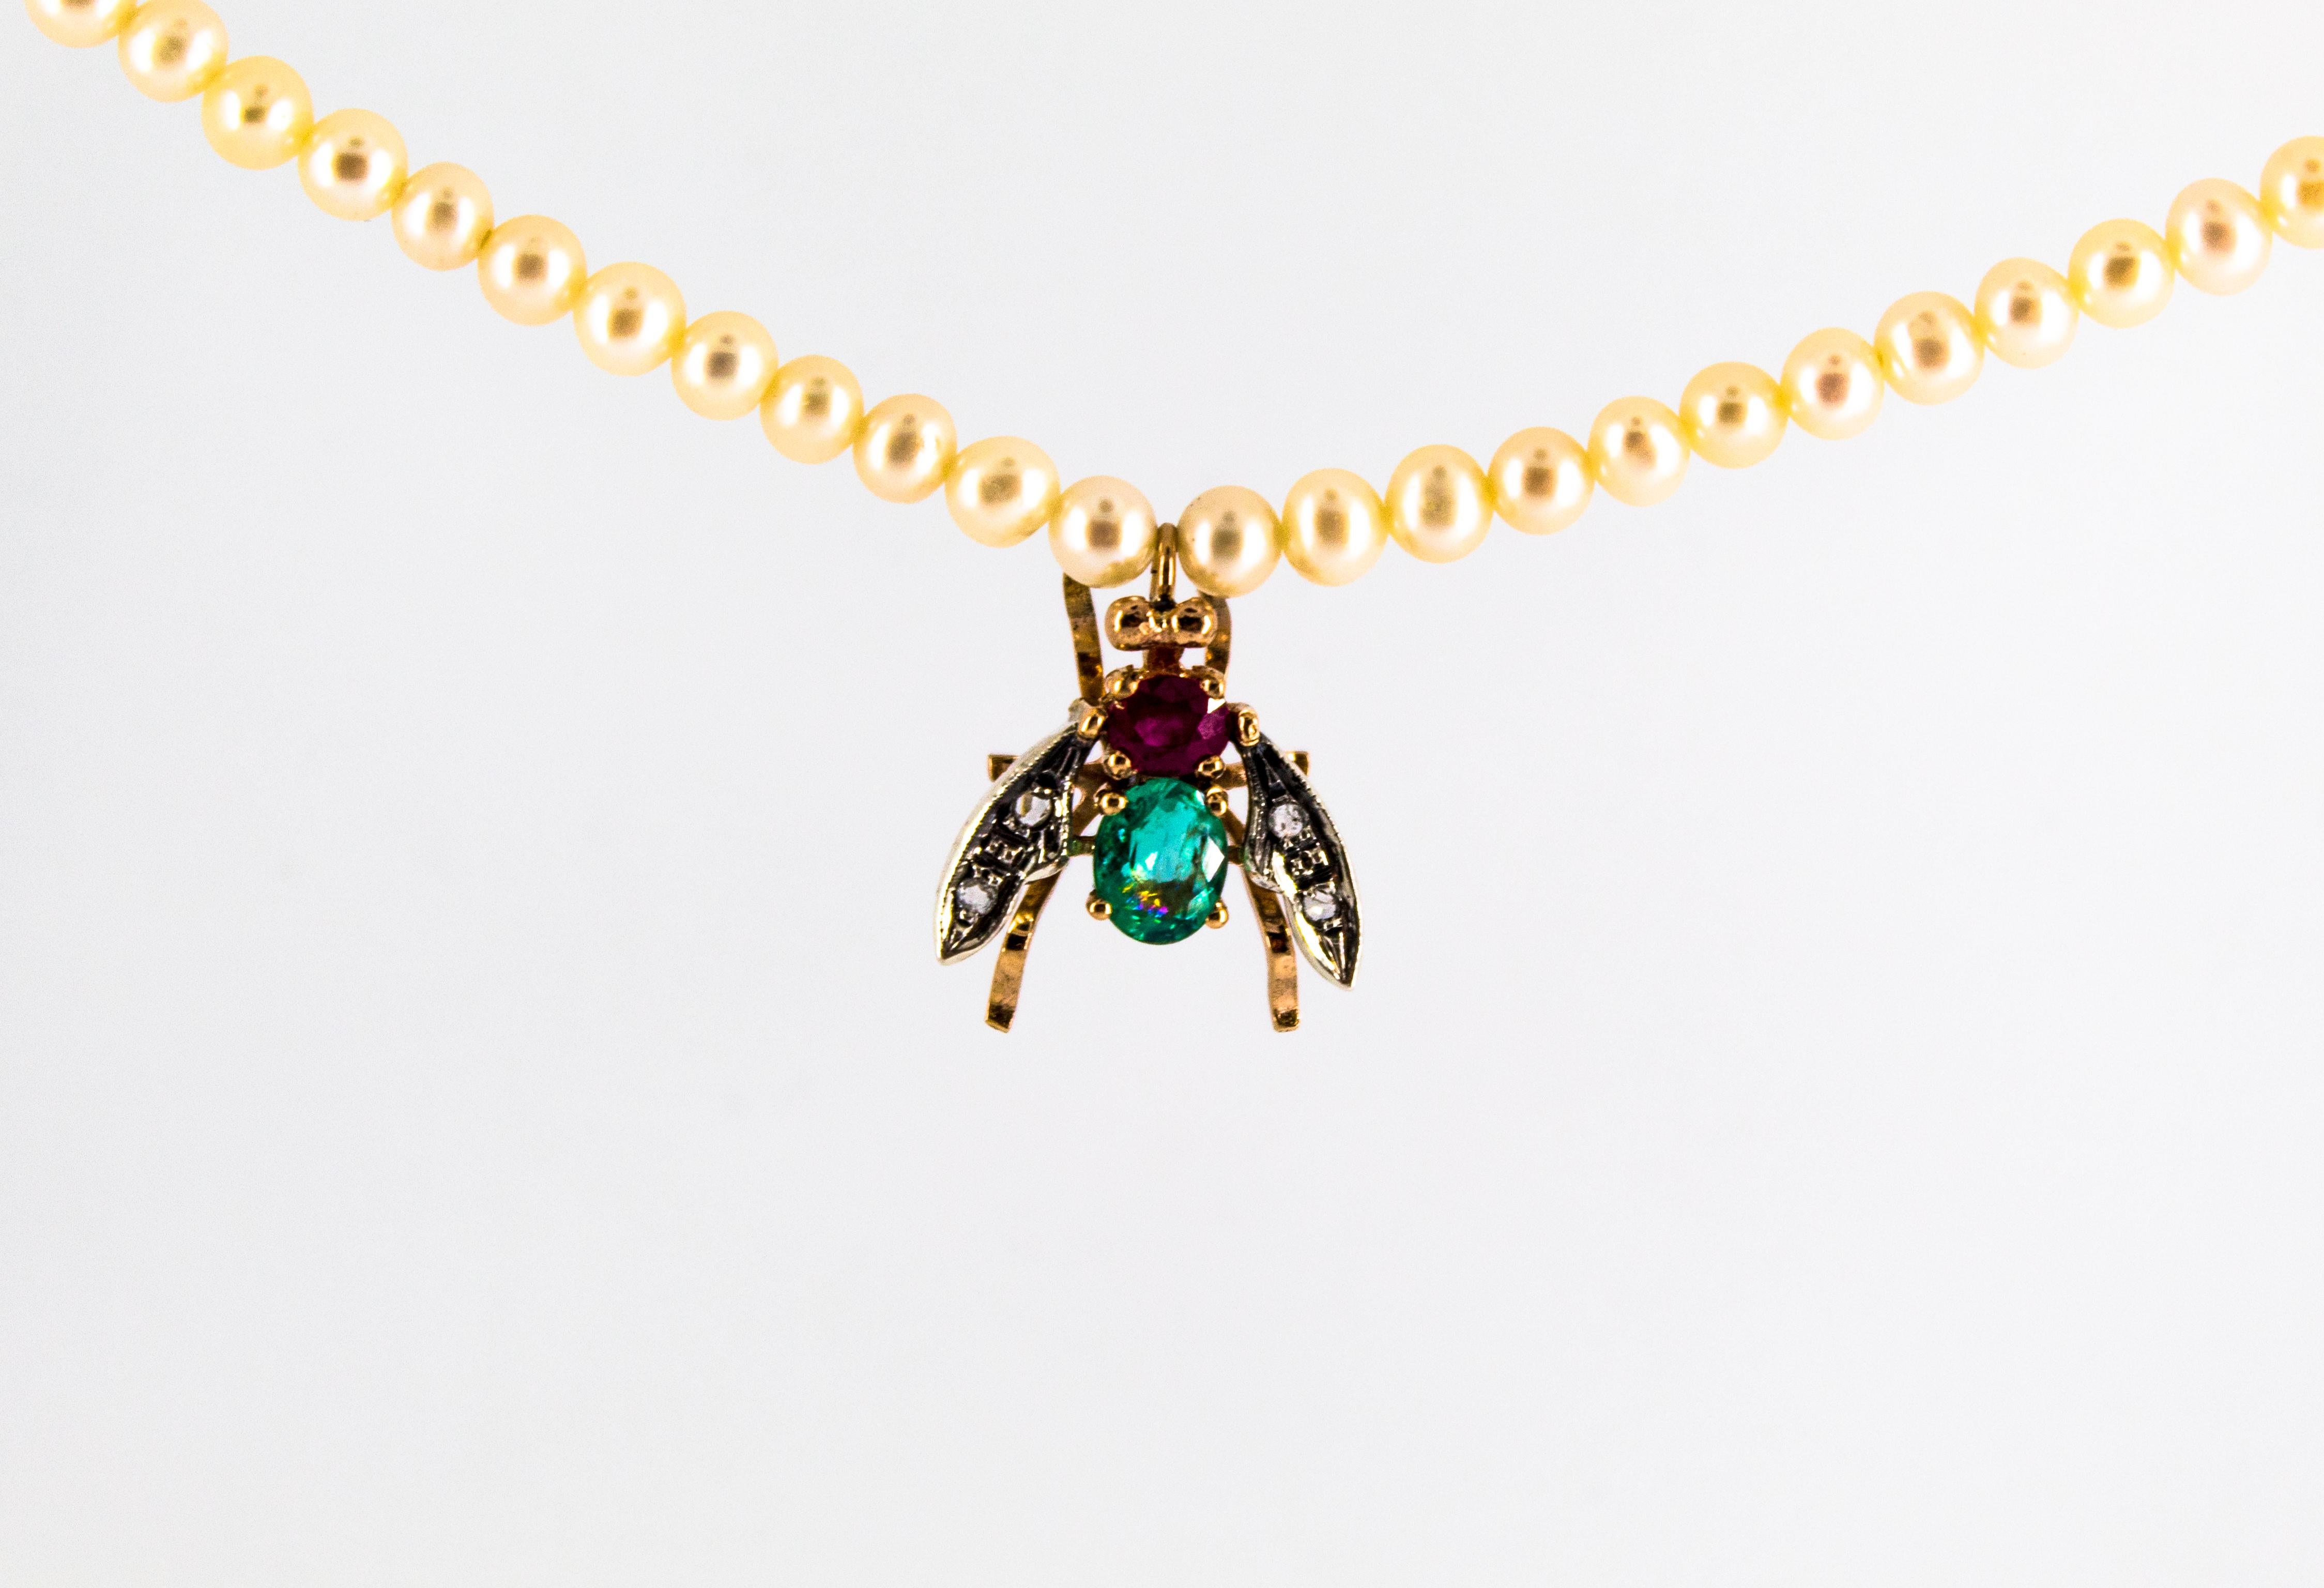 The Fly Pendant is made of 9K Yellow Gold and Sterling Silver but it is available also in 14K and 18K Yellow Gold.
The Fly Pendant has 0.08 Carats of White Rose Cut Diamonds.
The Owl Pendant has 1.30 Carats of Emerald and Ruby but it is available